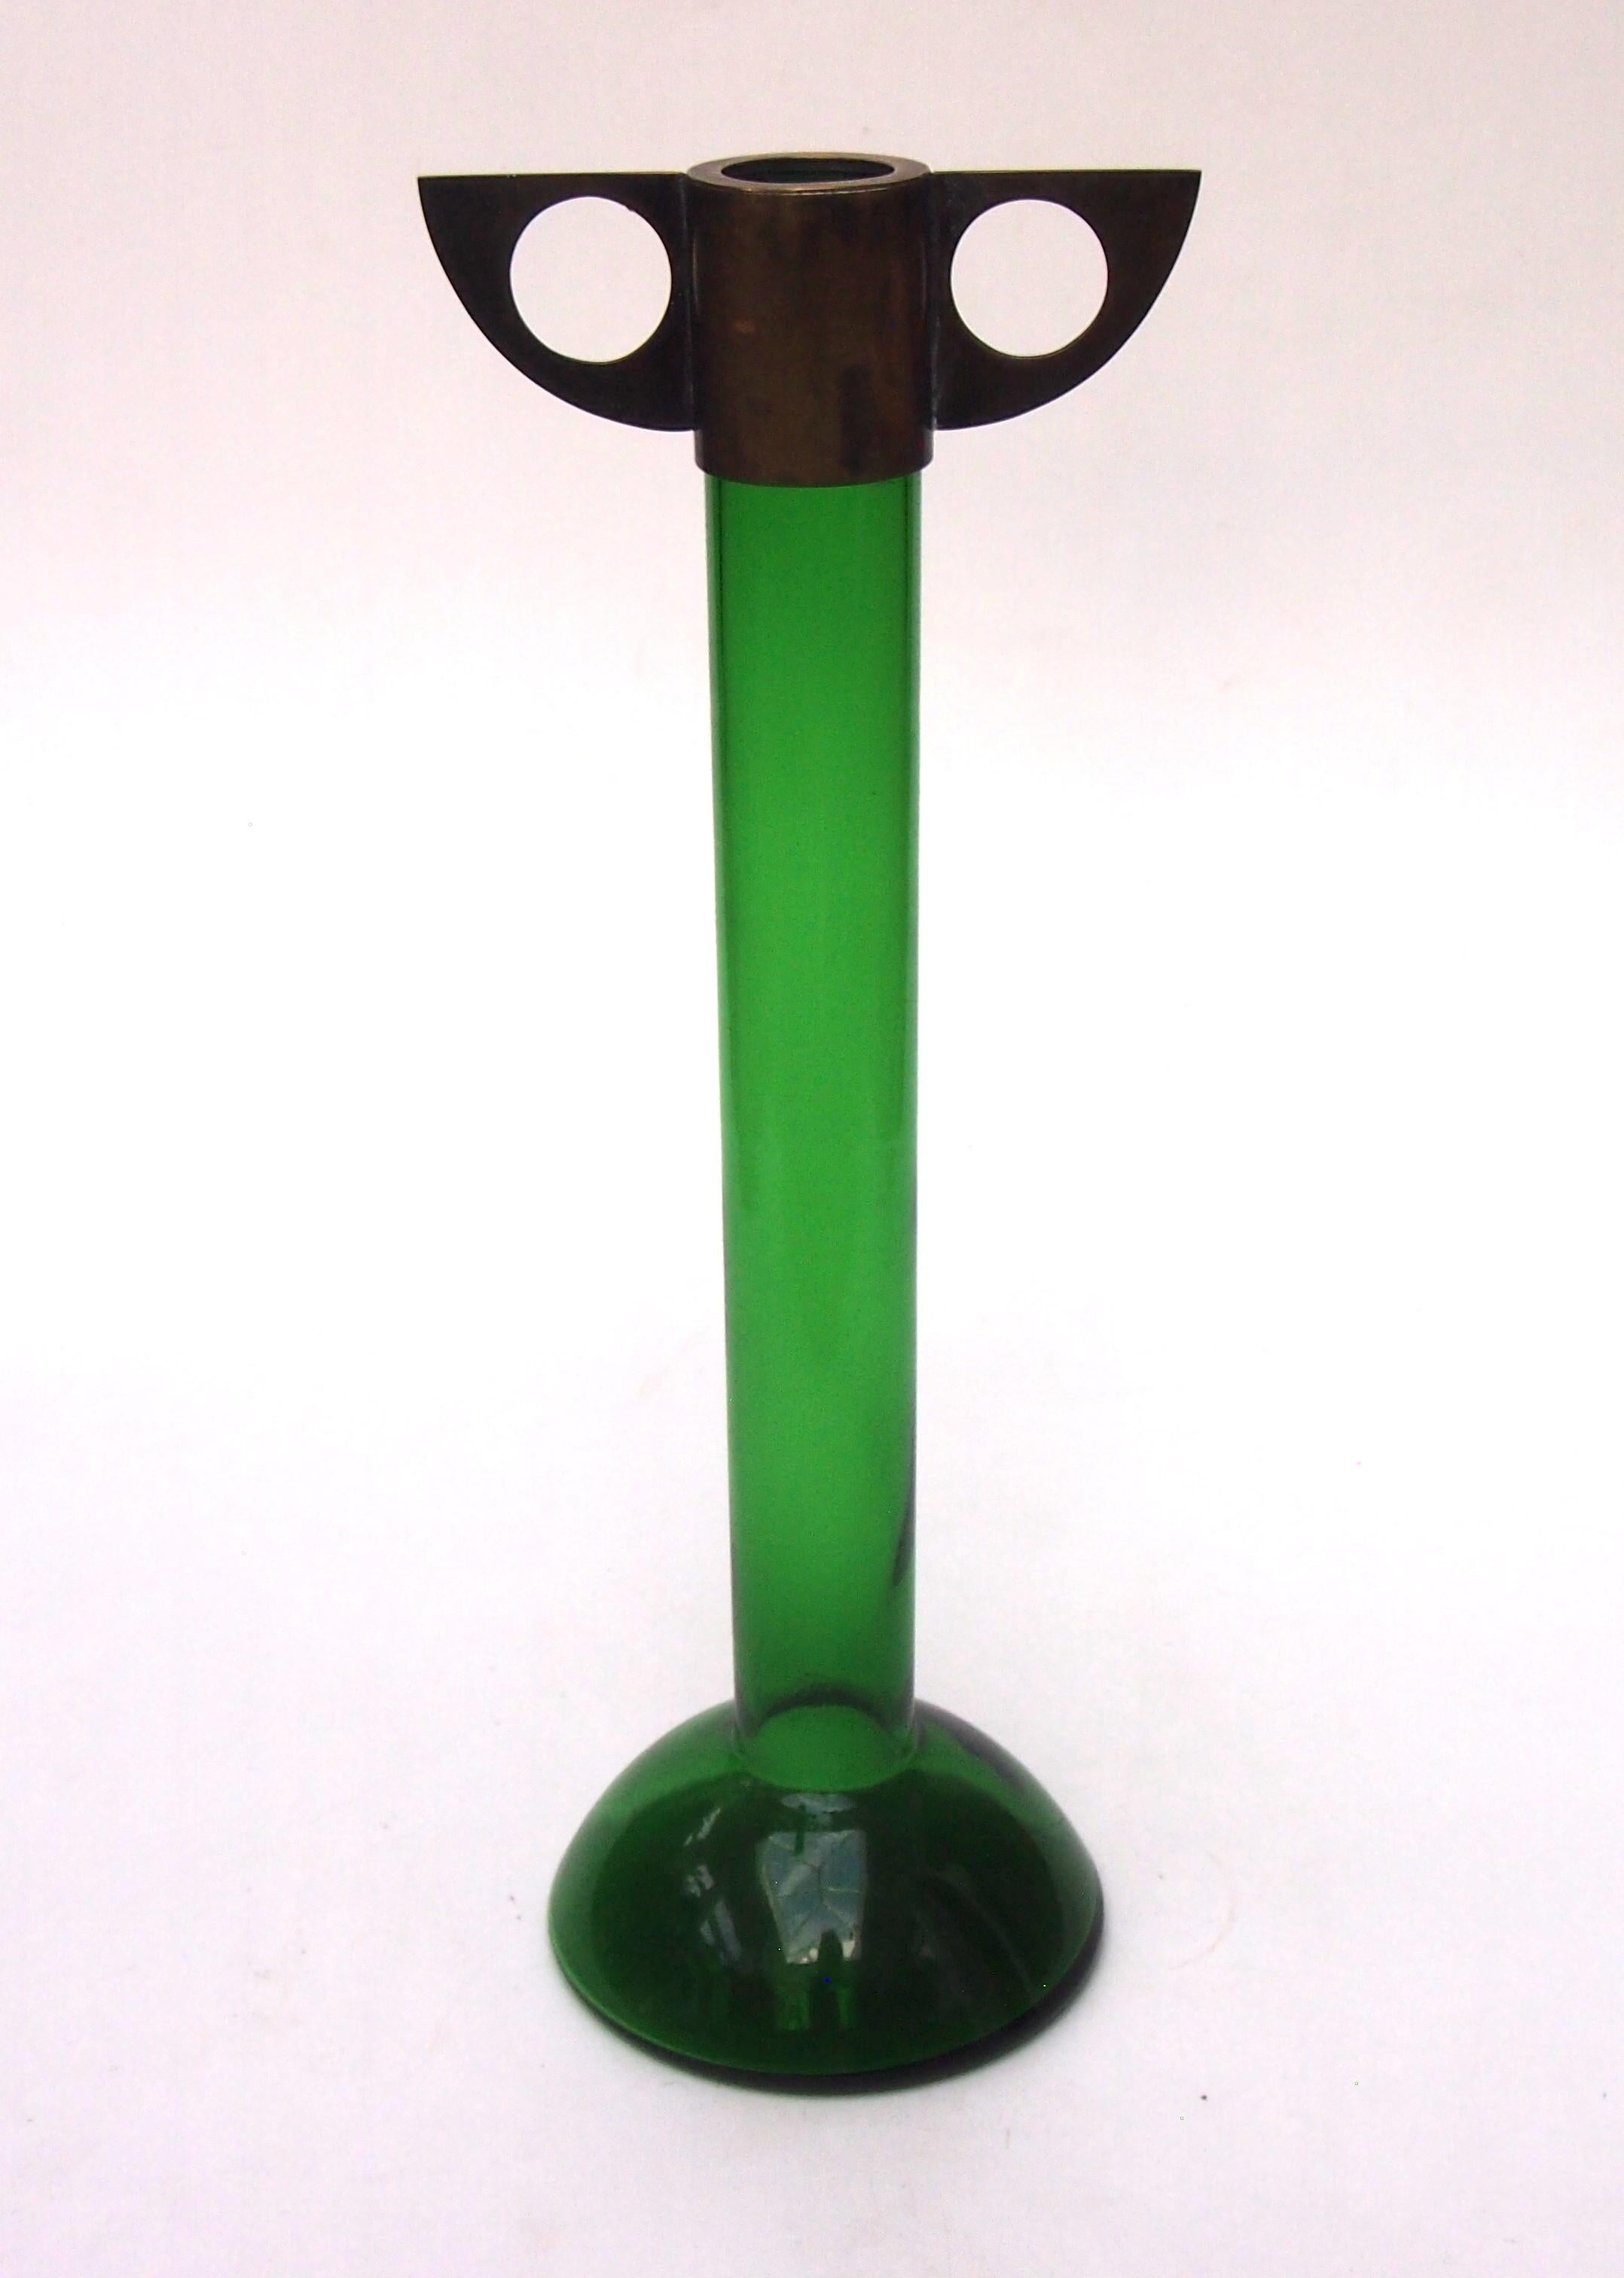 Vienna Secession Green Glass and Metal Solifleur  by Meyrs Neffe after a design by Joseph Hoffman For Sale